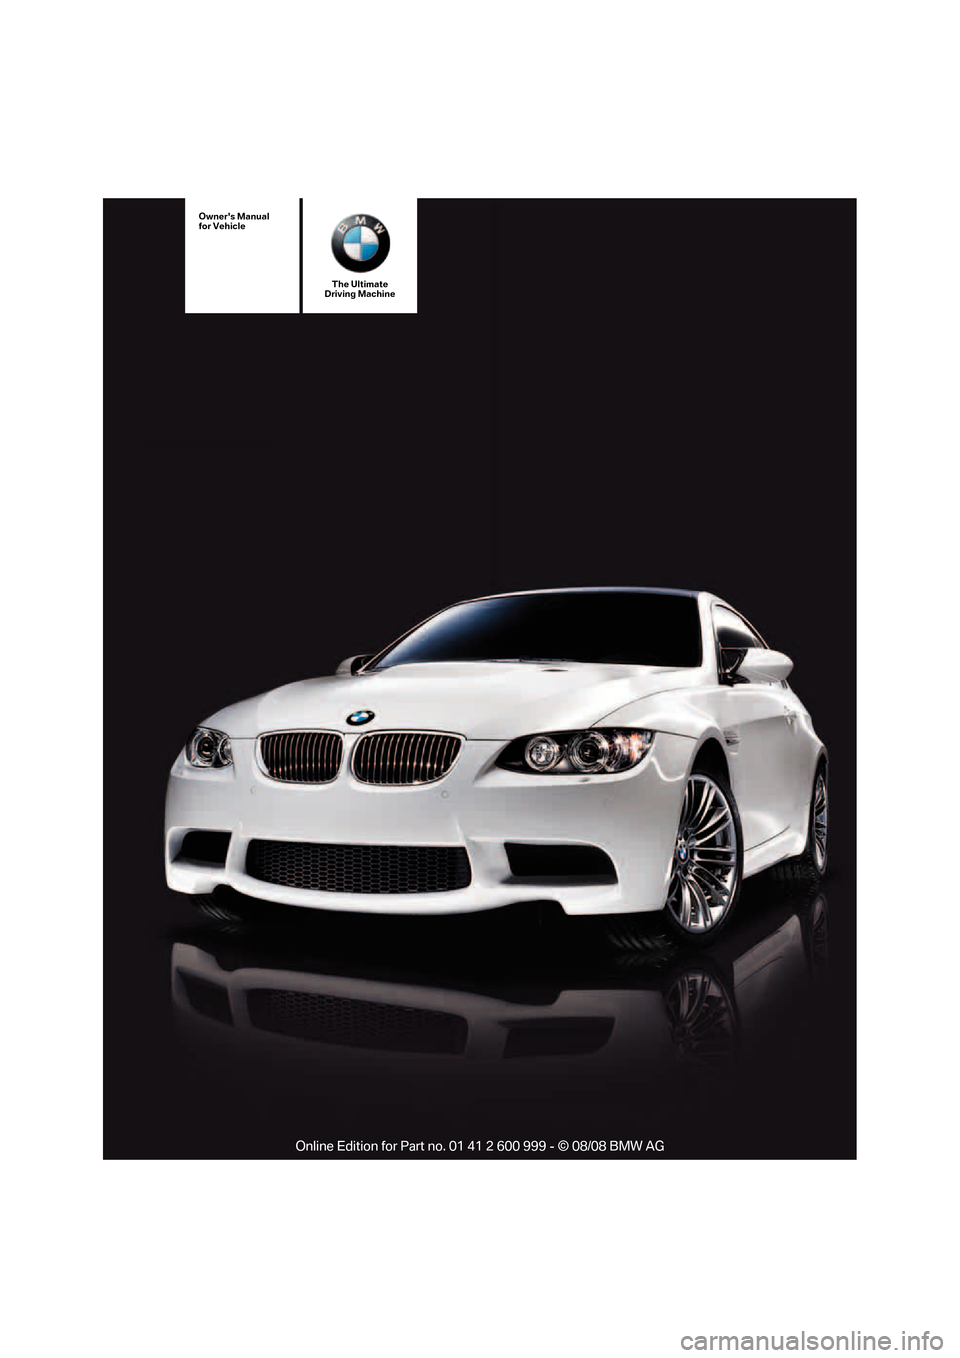 BMW M3 CONVERTIBLE 2009 E93 Owners Manual The Ultimate
Driving Machine
Owners Manual
for Vehicle
ba8_E9293M3_cic.book  Seite 1  Dienstag, 19. August 2008  12:01 12 